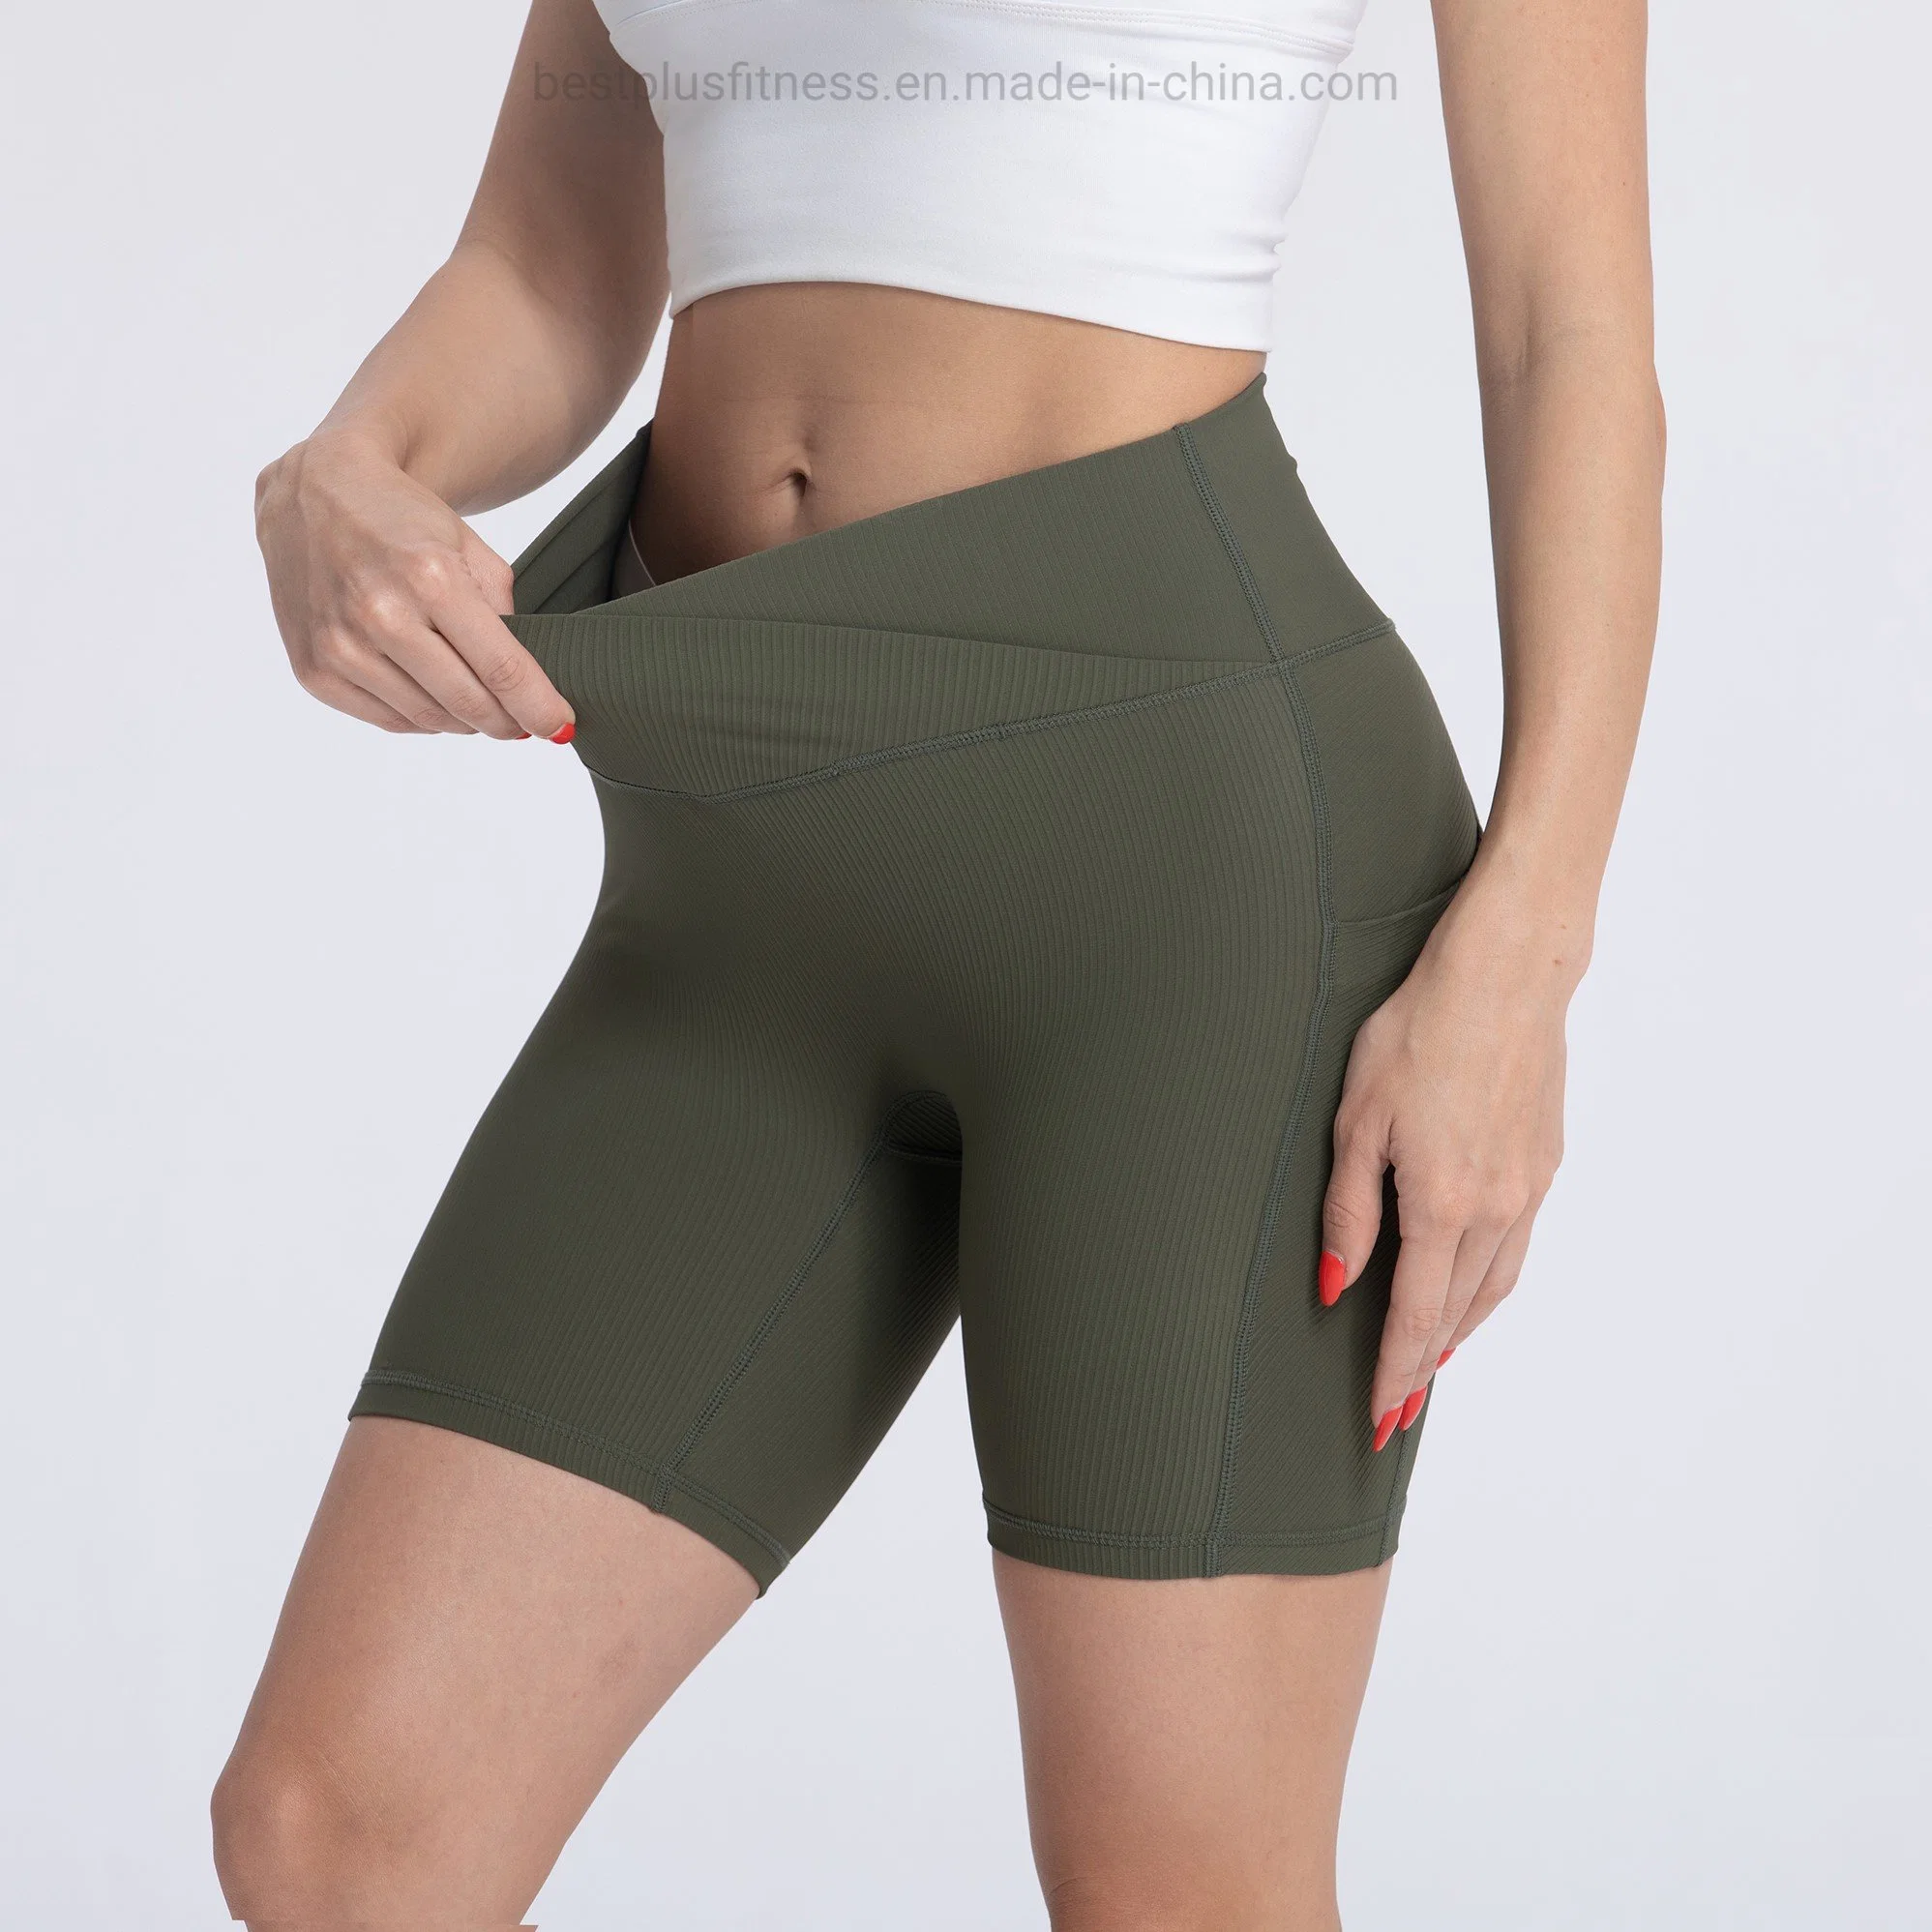 Exercise Elastic High Waist Seamless Tight Fitness Sports Pants Yoga Shorts Wear with Side Pocket